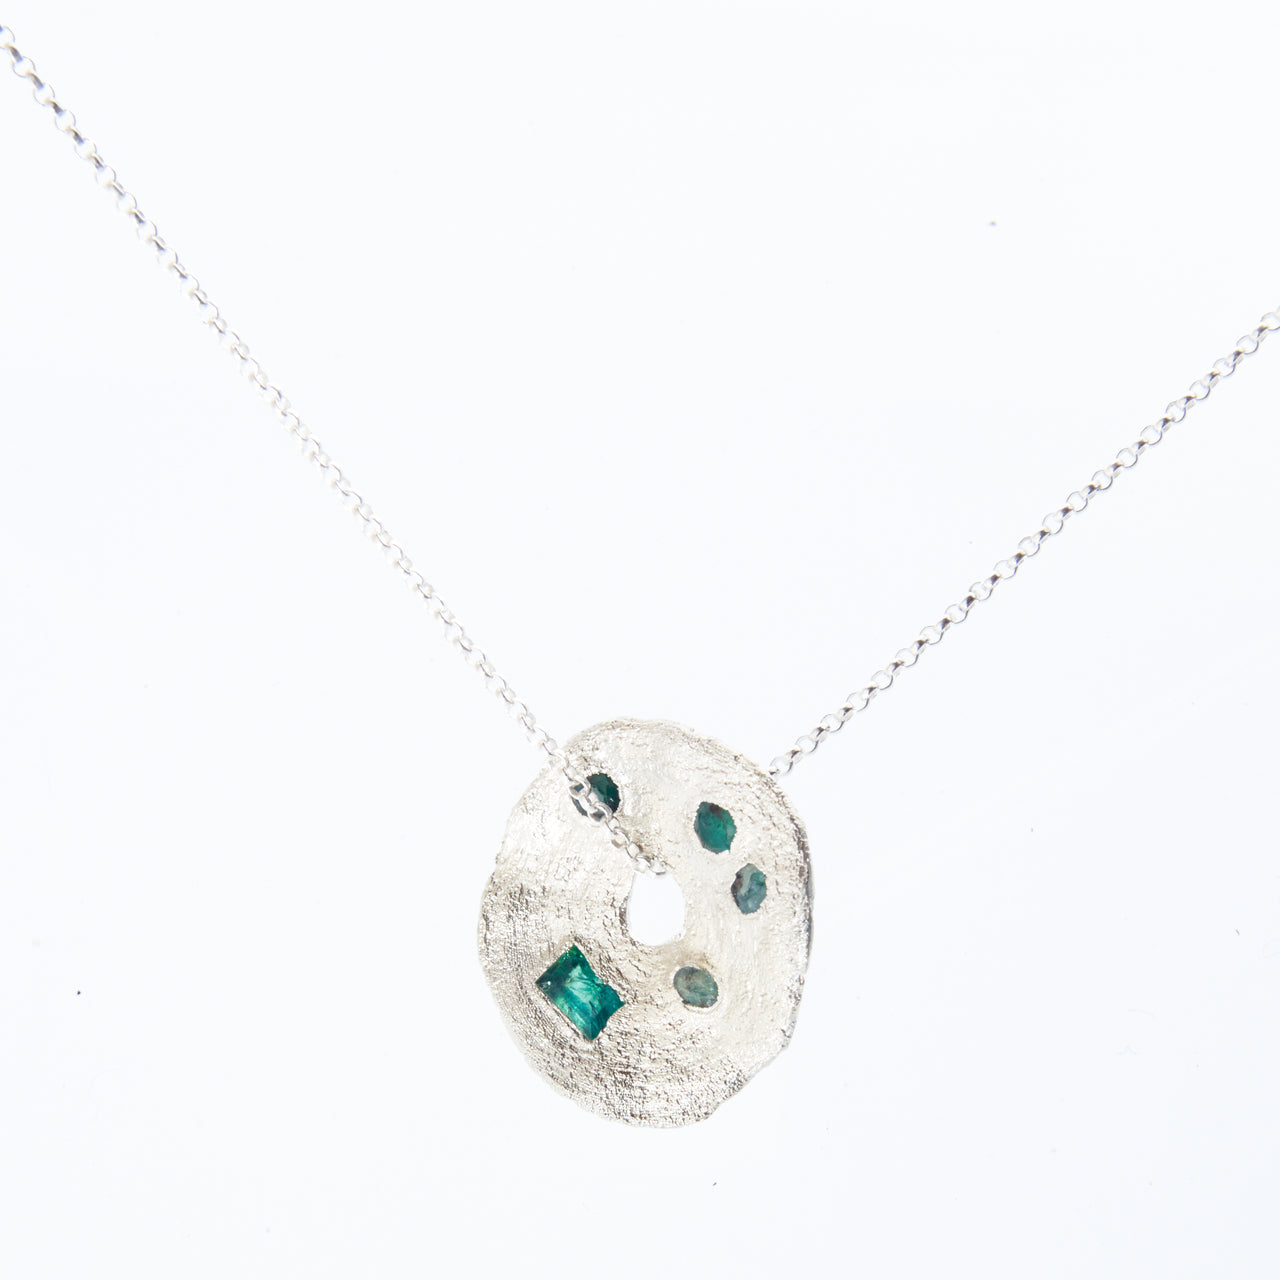 Silver Circle Pendant with Emeralds